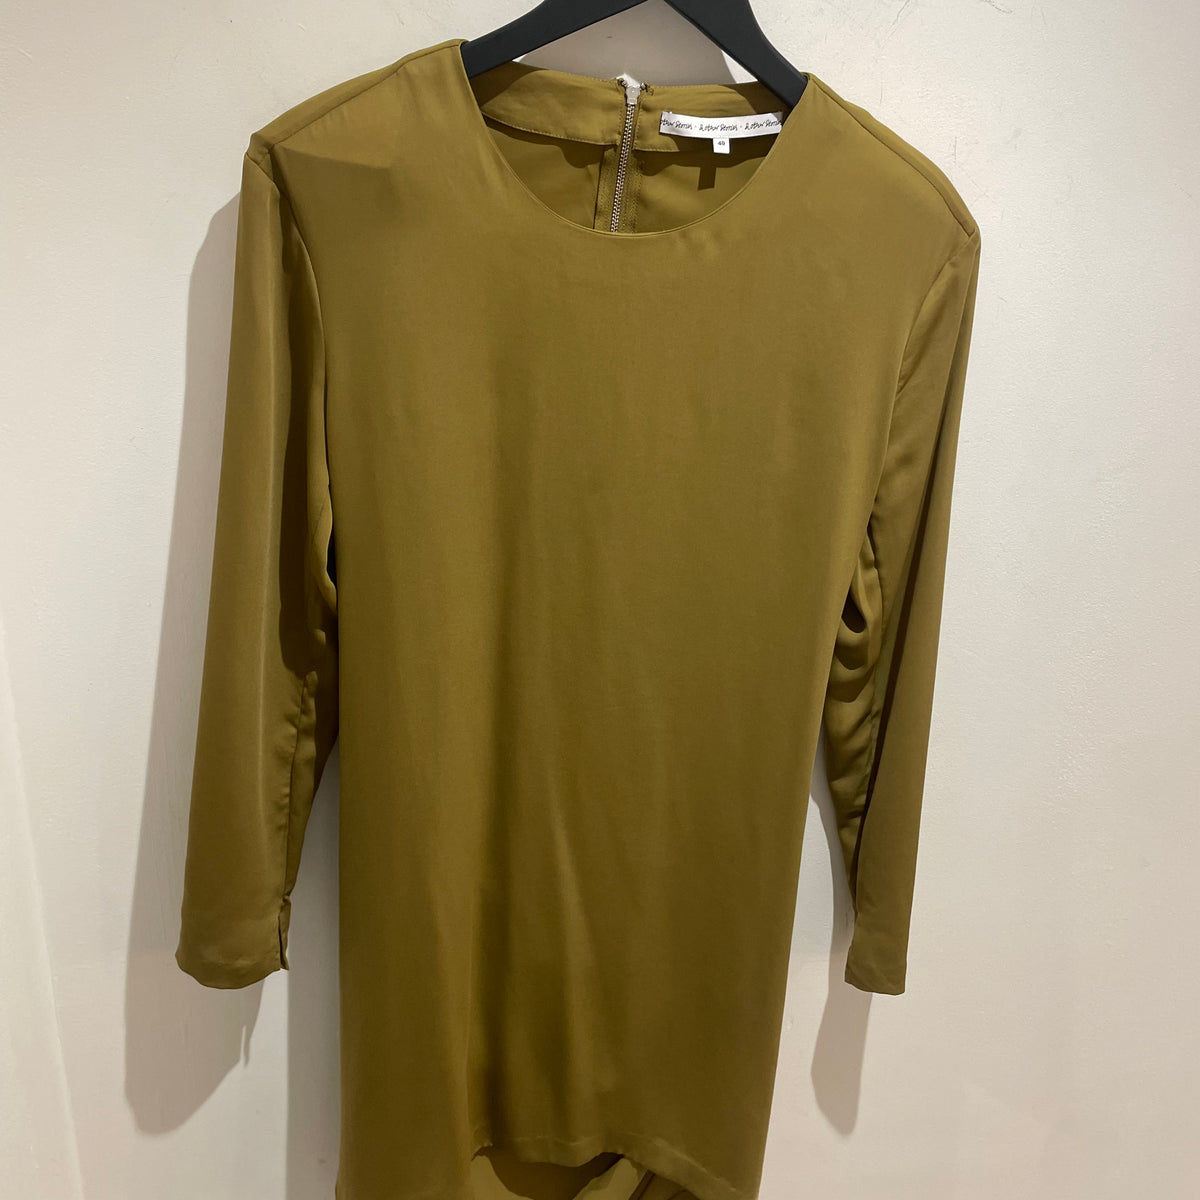 & Other stories dress Green / Olive Size 10